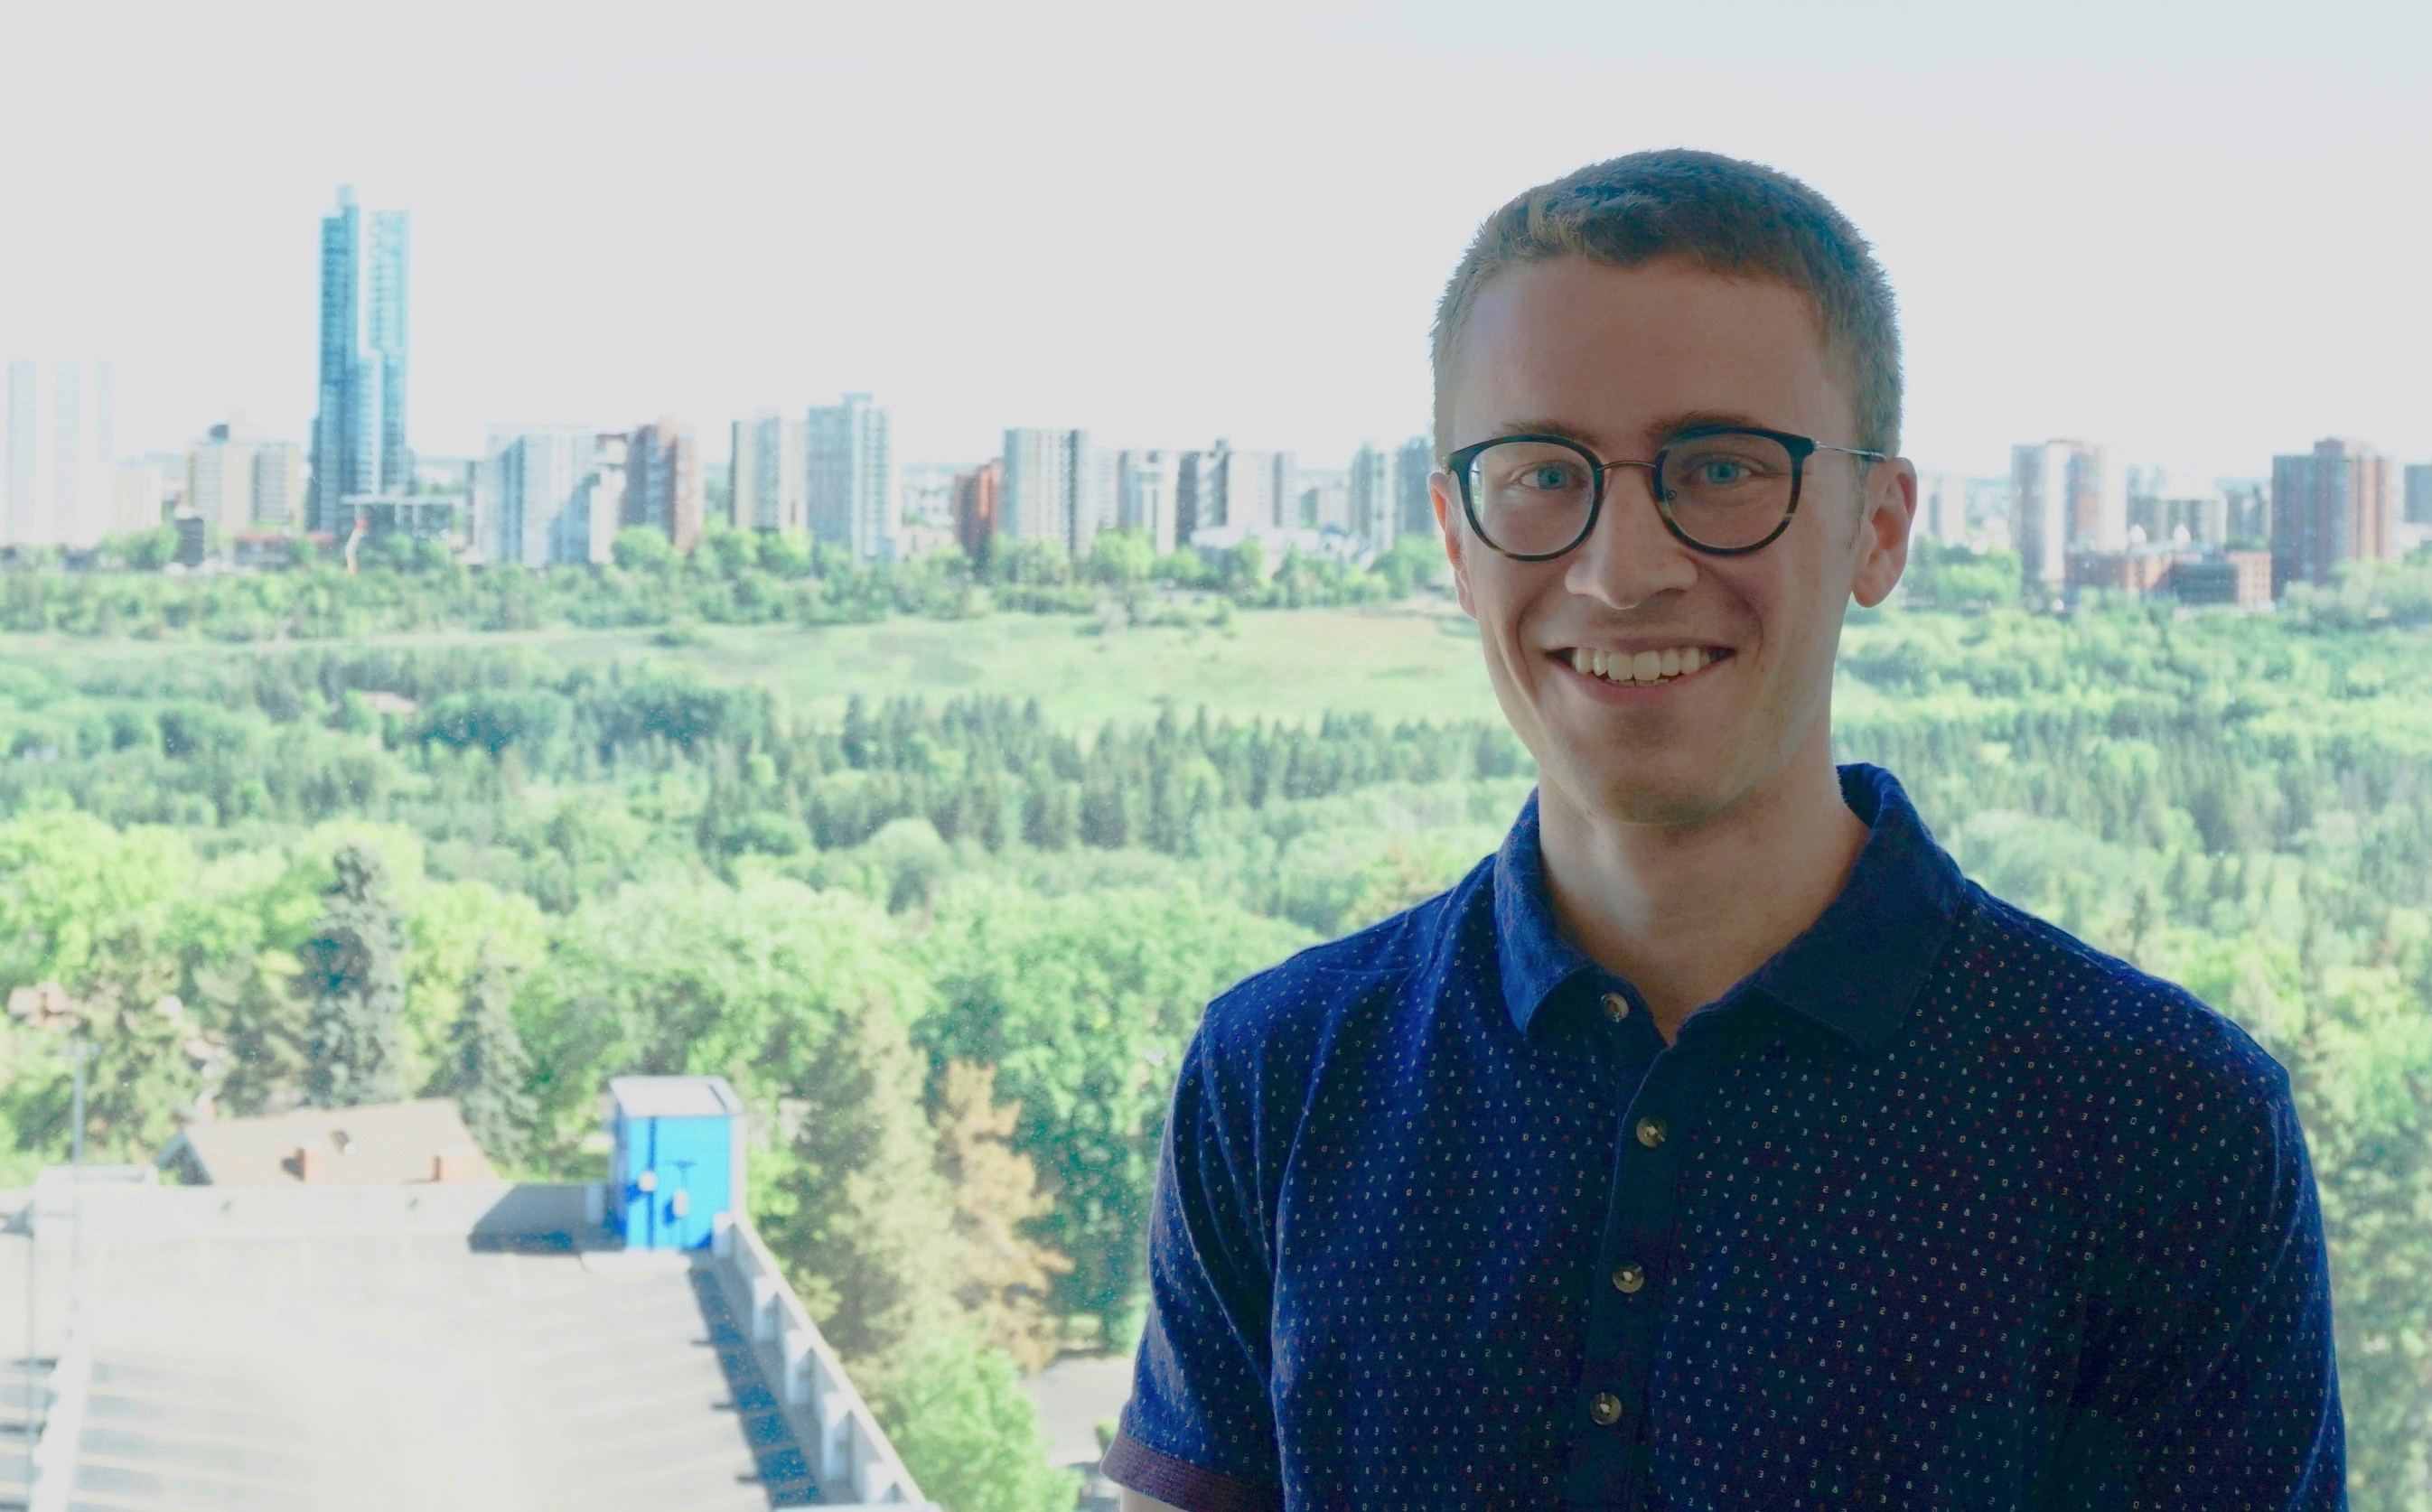 Scott Wilson, engineering physics co-op program graduate, and winner of the Governor General's Silver Medal and the CD Howe Memorial Fellowship for having the highest academic standing in the Faculty of Engineering